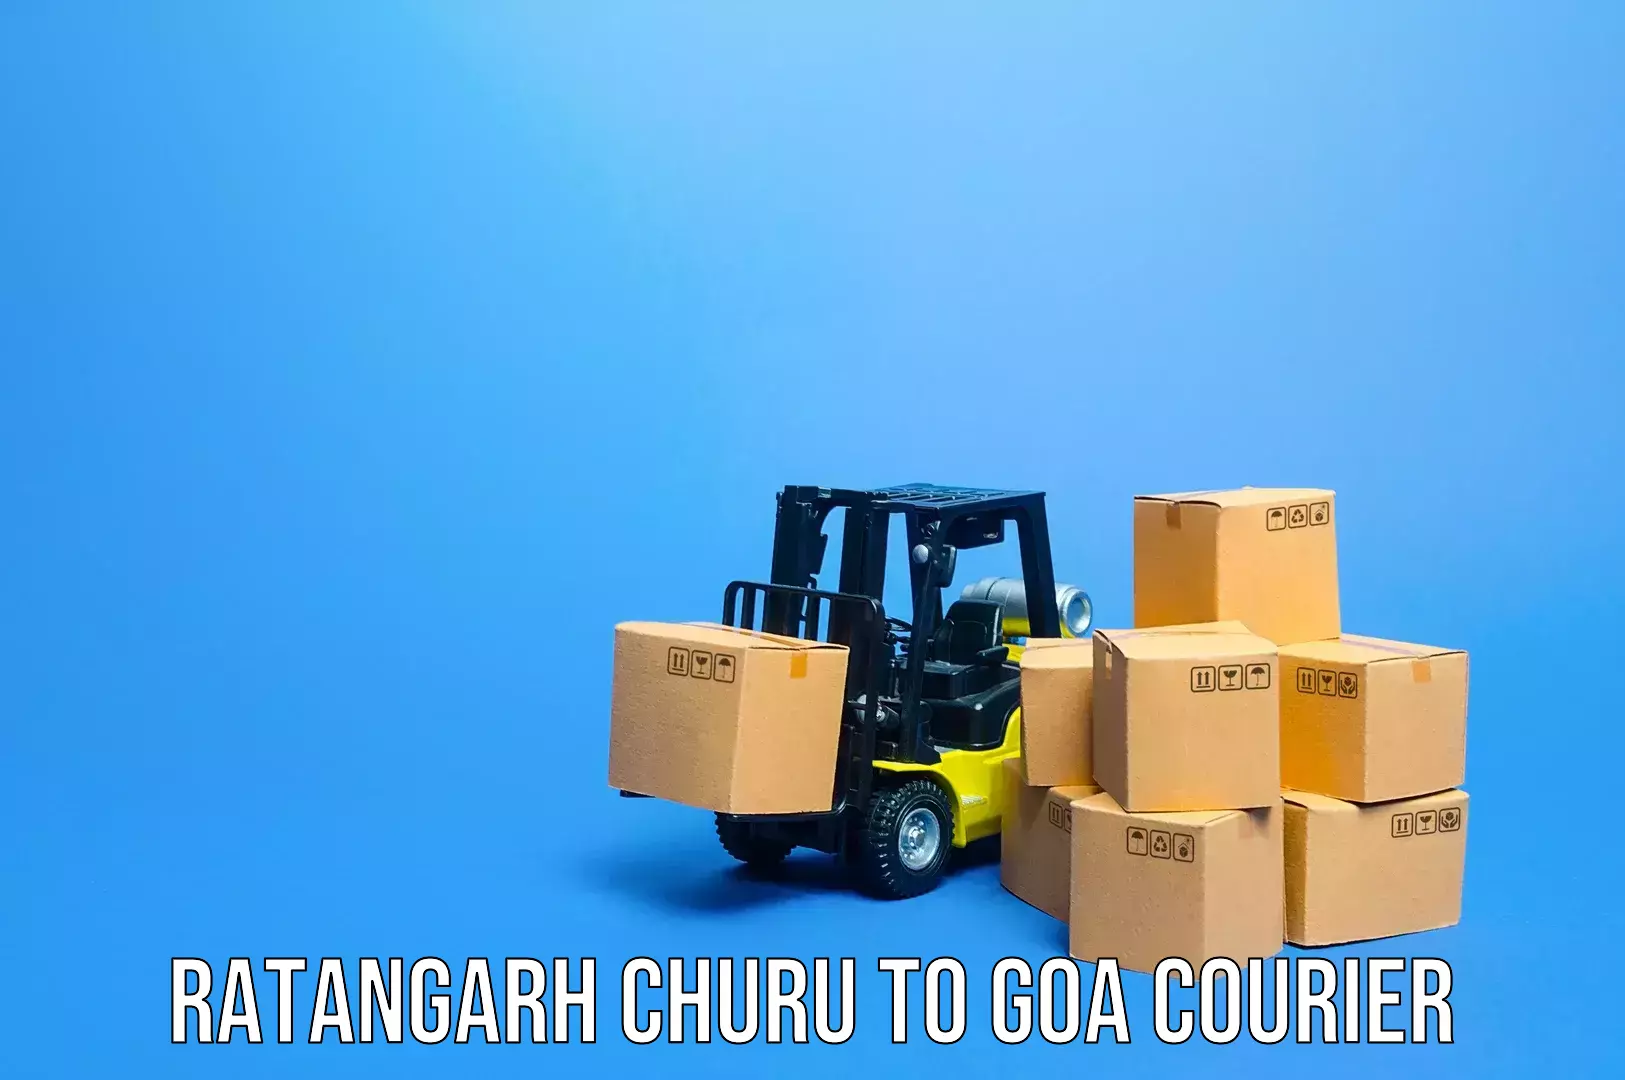 Luggage delivery system Ratangarh Churu to South Goa